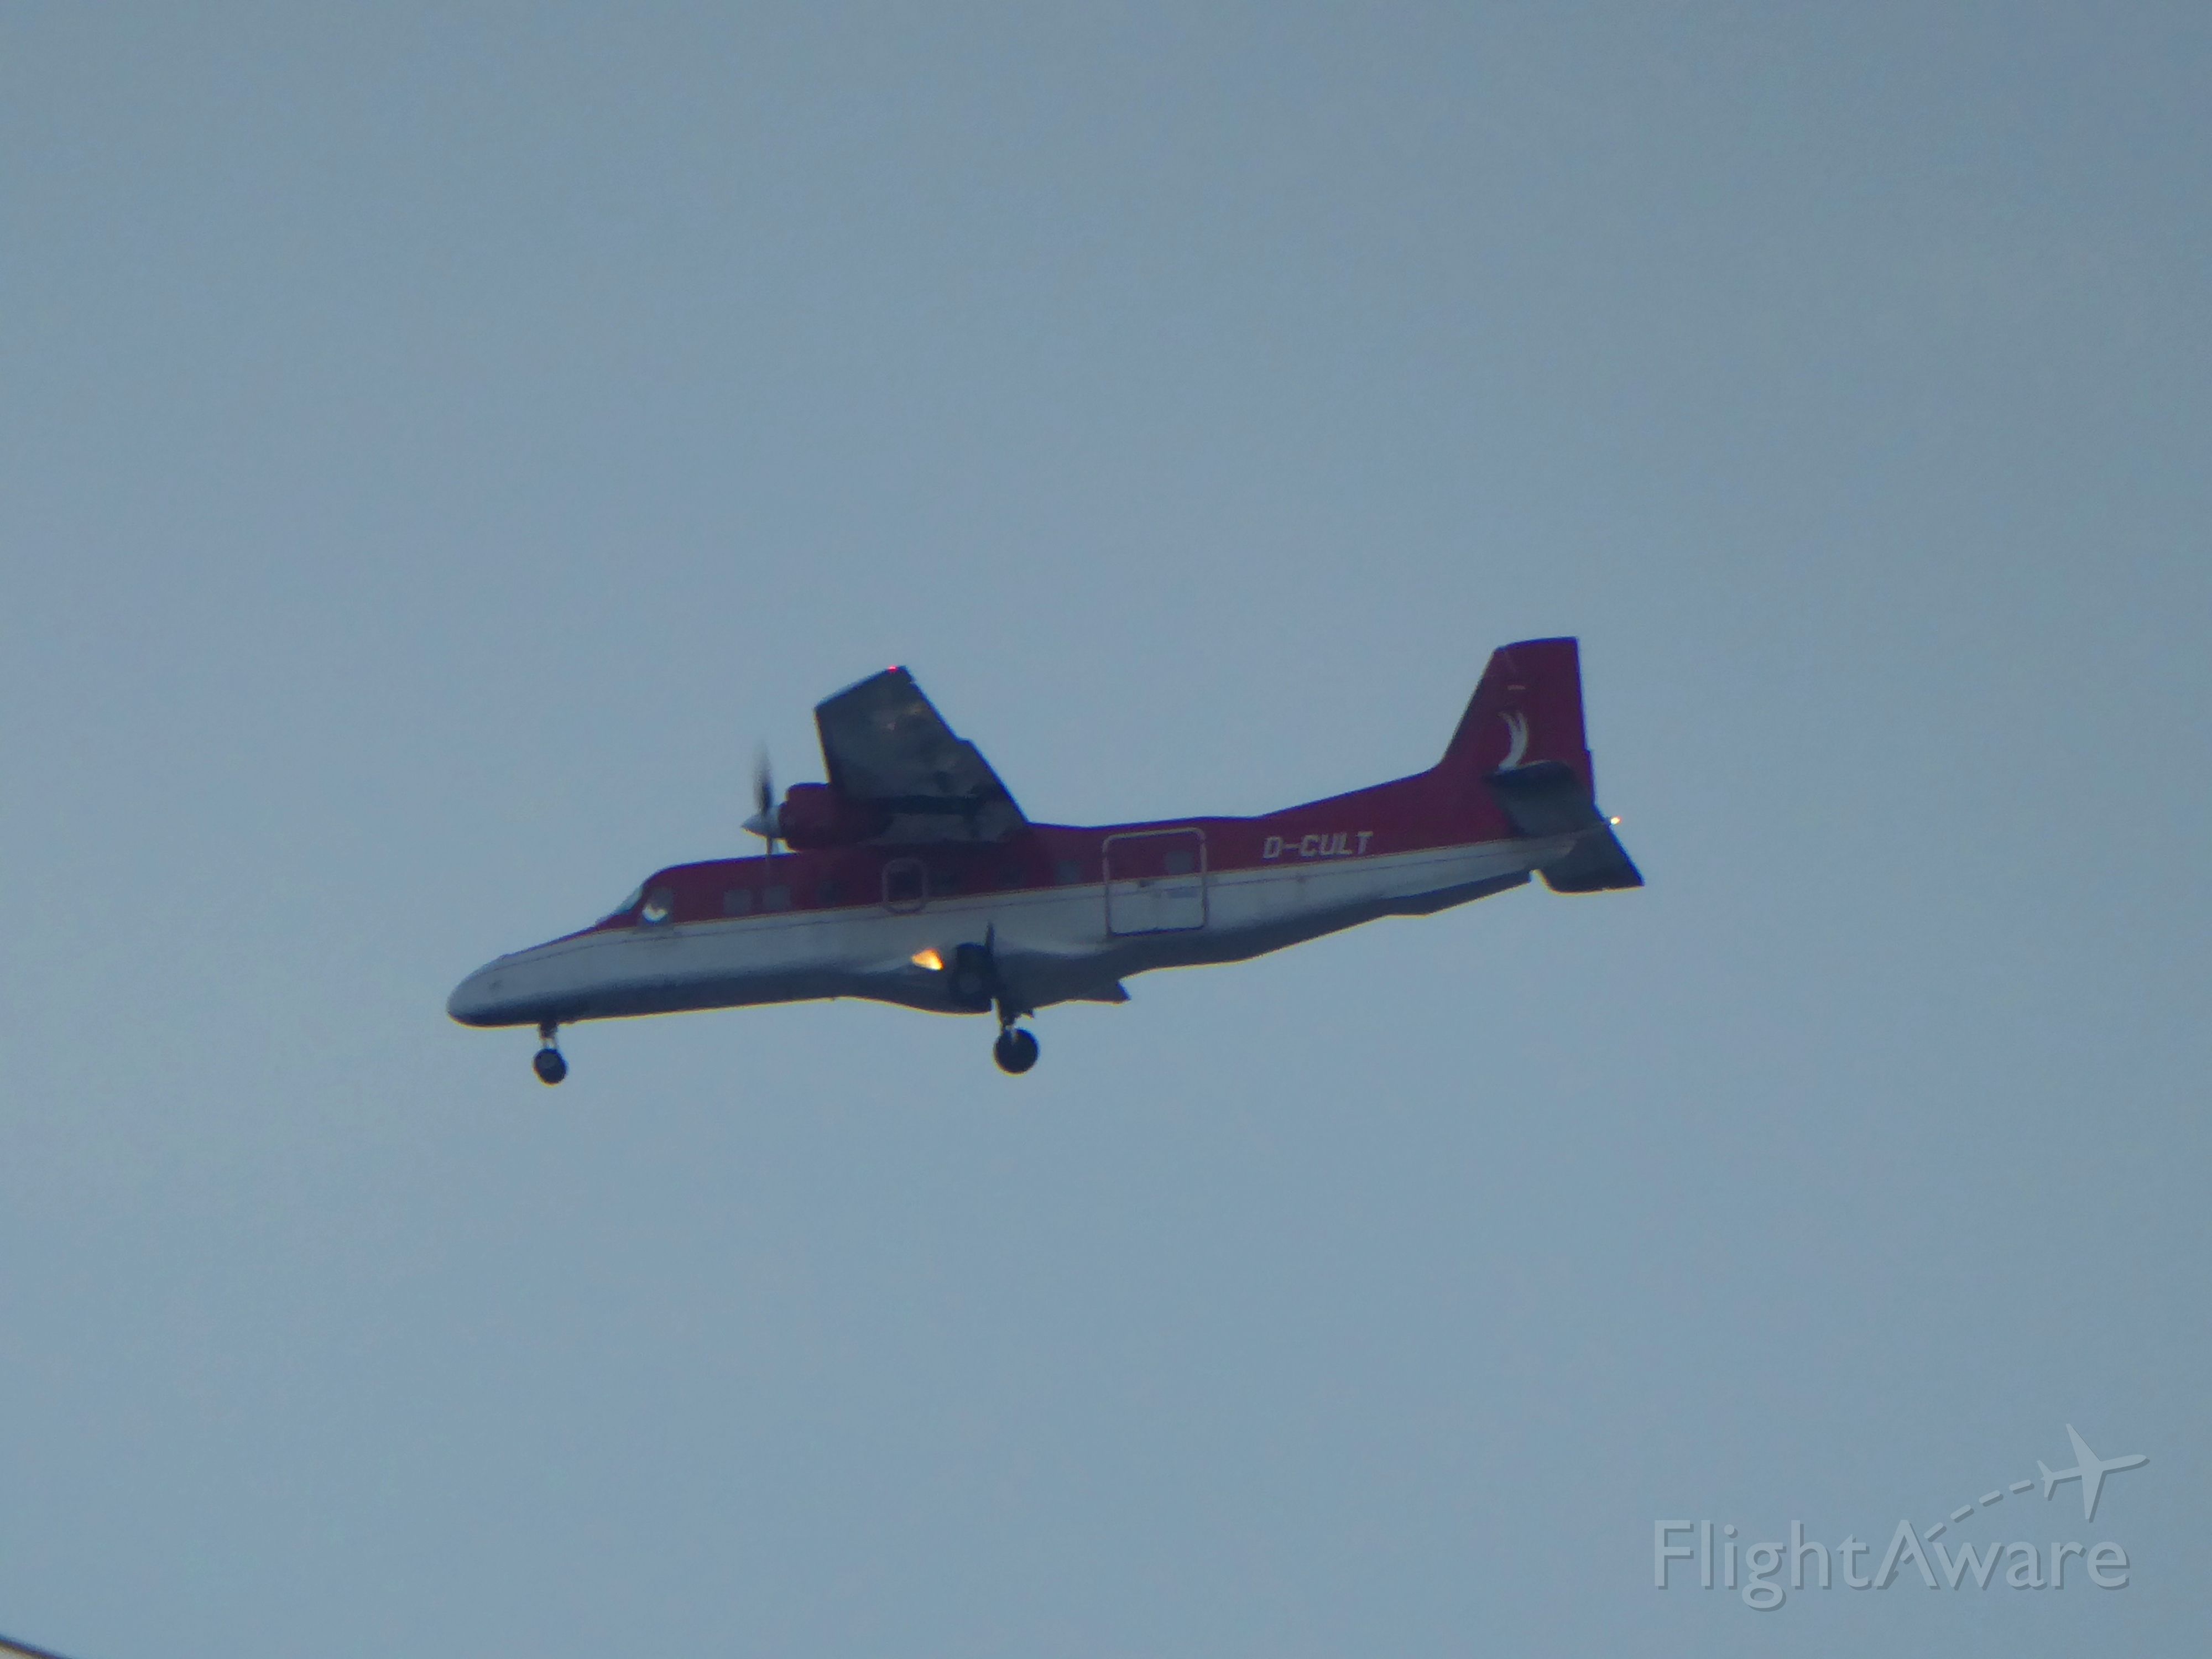 Fairchild Dornier 228 (D-CULT) - Businesswings Do-228-202K D-CULT over Mannheim main station in approach for MHG. 09.03.2016. Sorry for the less quality, I had to use much of zoom when seeing the plane.